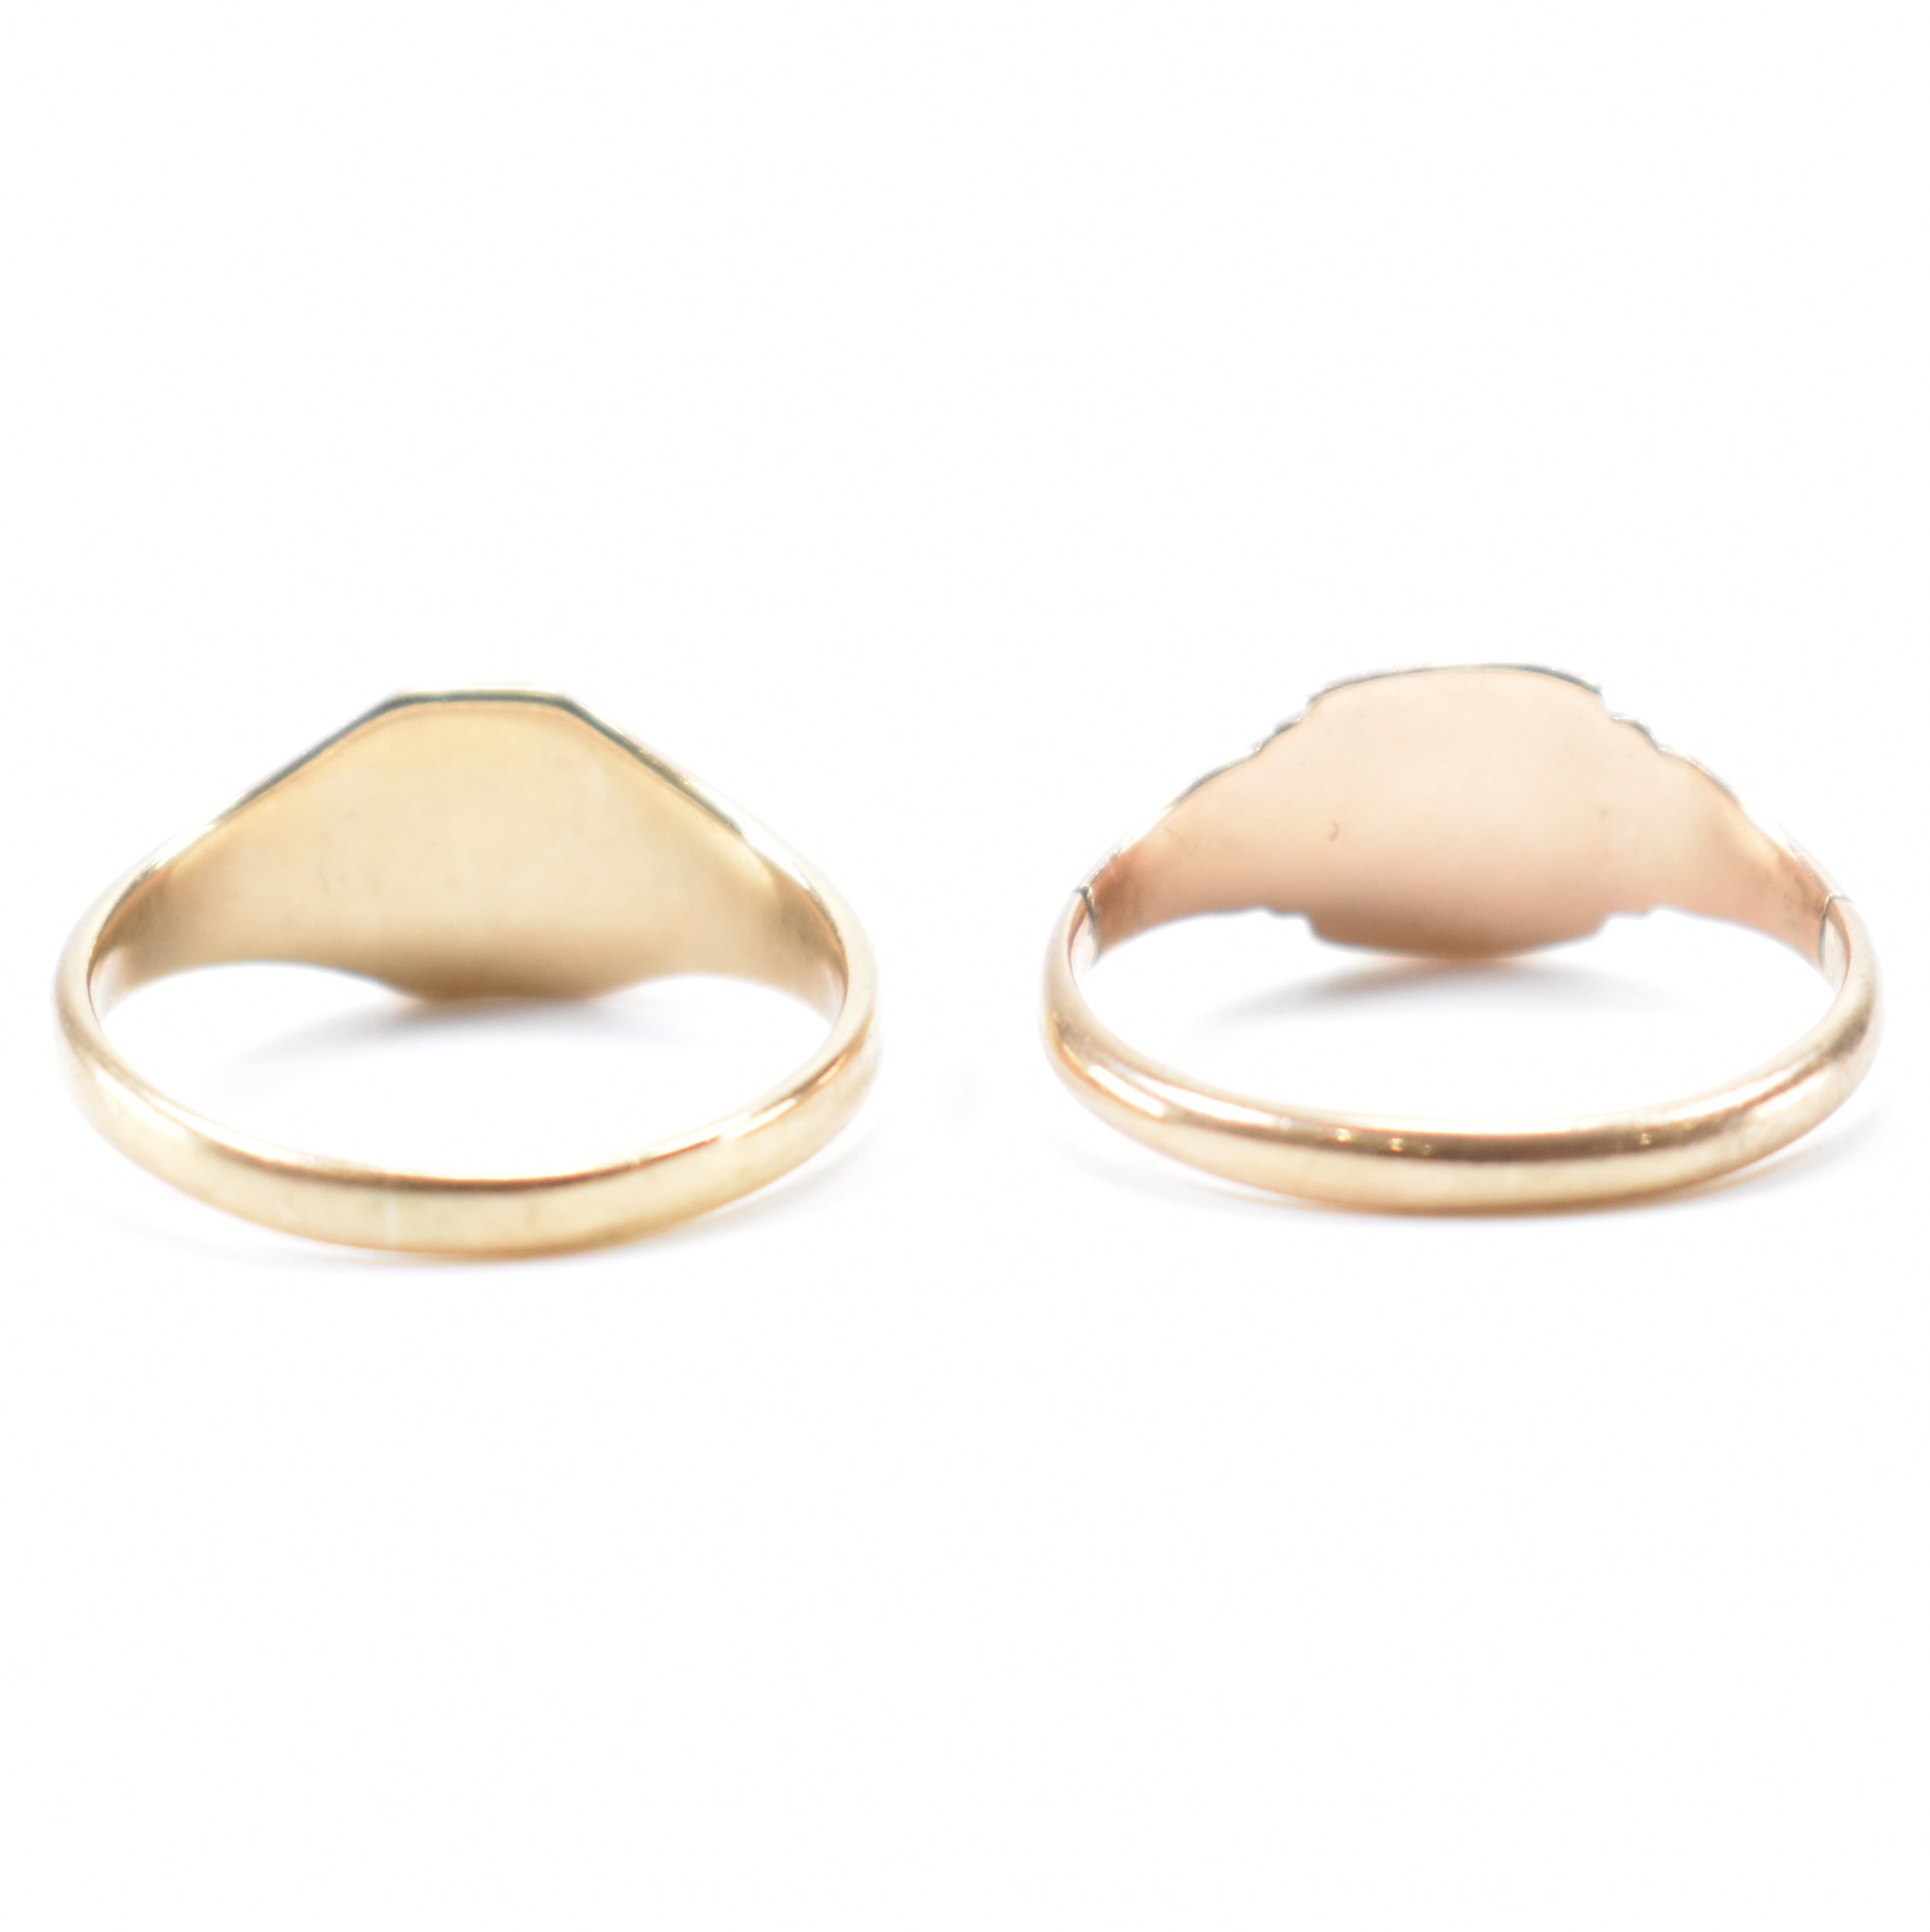 TWO 9CT GOLD SIGNET RINGS - Image 3 of 7